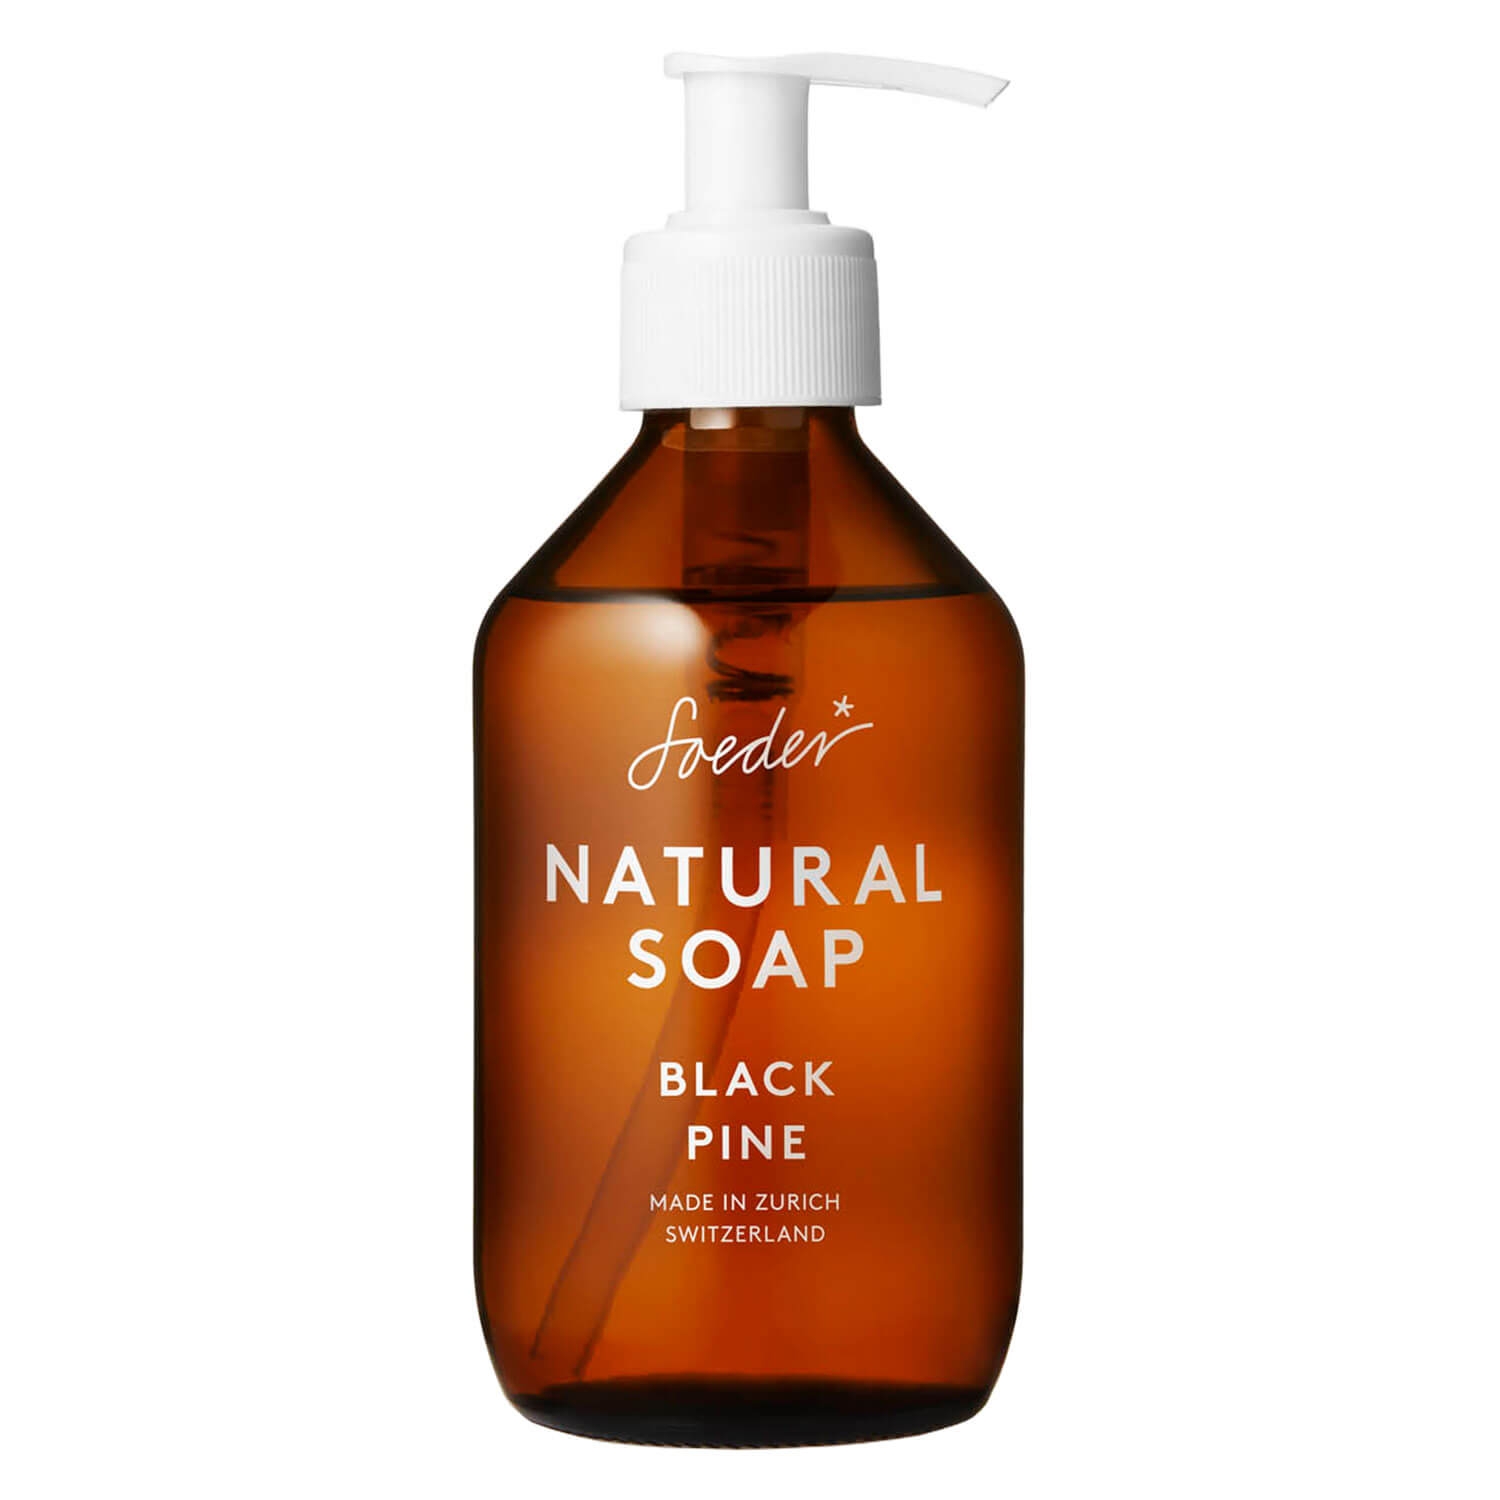 Product image from Soeder - Natural Soap Black Pine